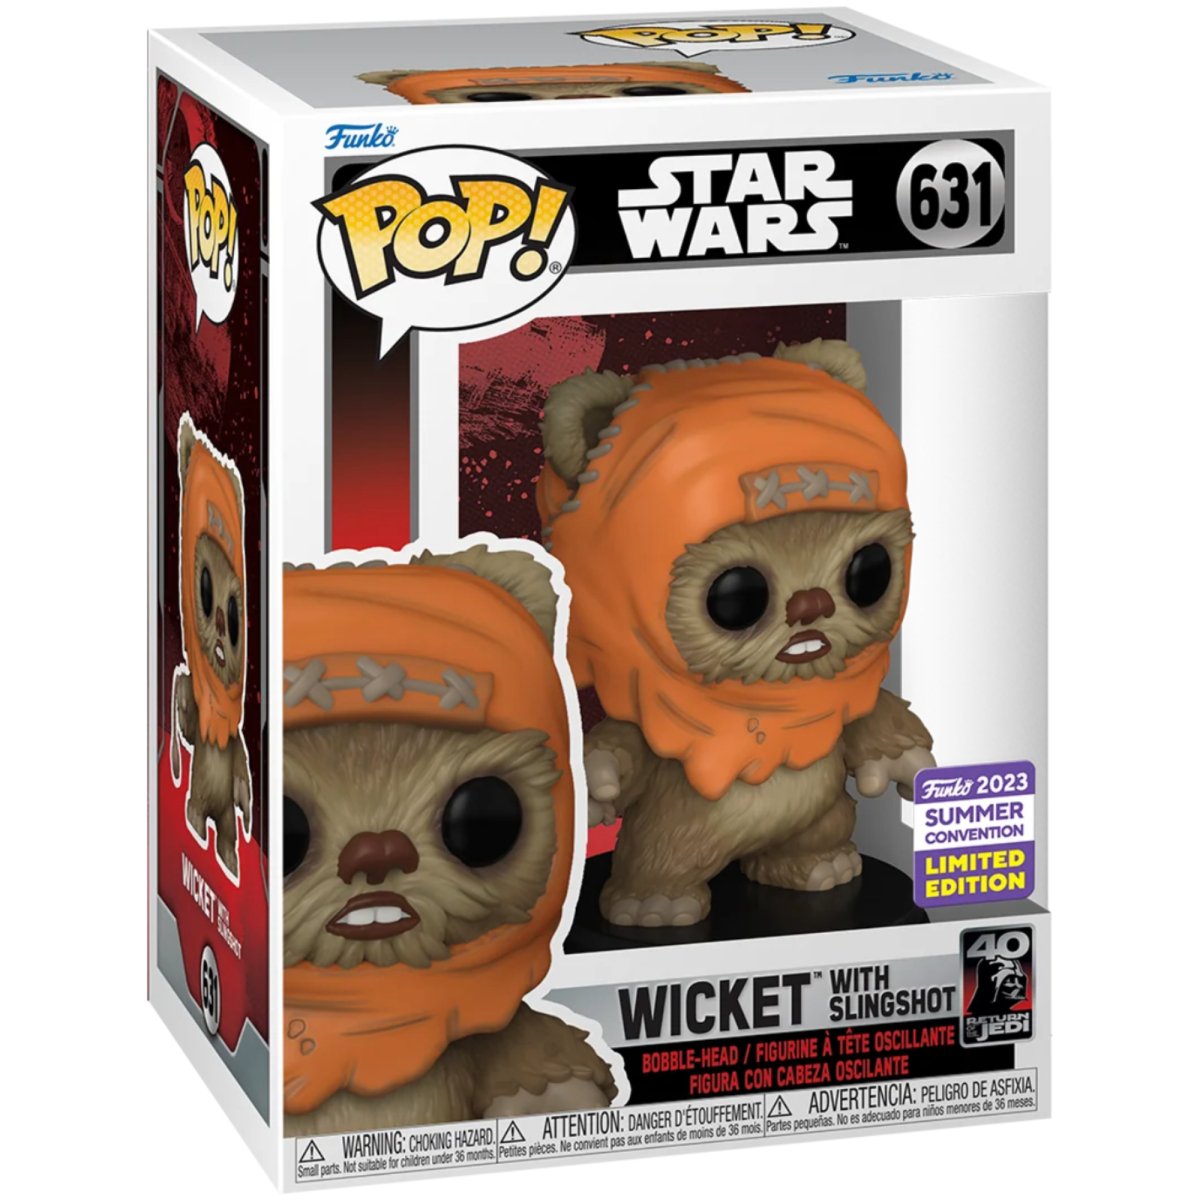 Star Wars - Wicket with Slingshot [Return of the Jedi] (2023 Summer Convention Limited Edition) #631 - Funko Pop! Vinyl Star Wars - Persona Toys